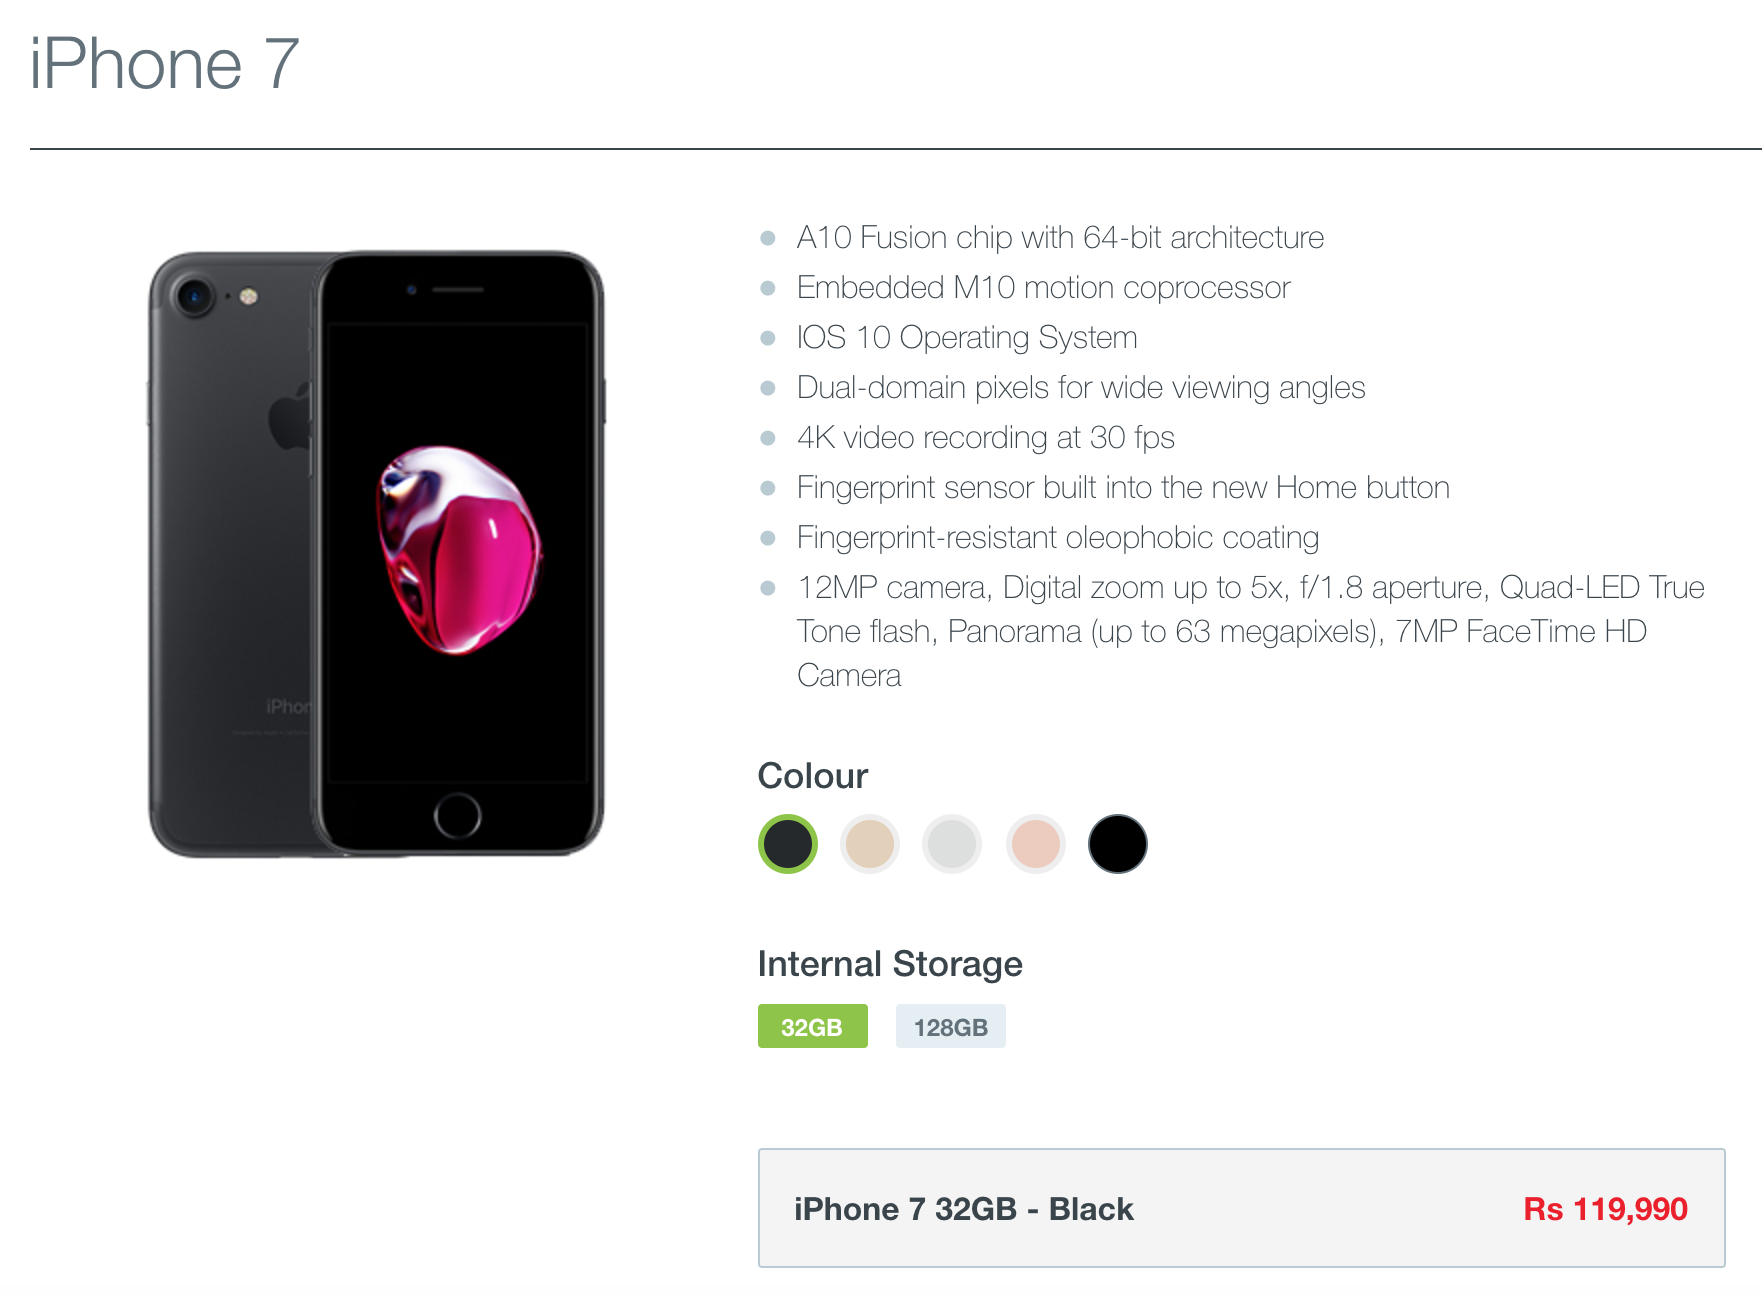 iPhone 7 32GB Dialog Andro Dollar - Dialog launches the iPhone 7 and iPhone 7 Plus in Sri Lanka